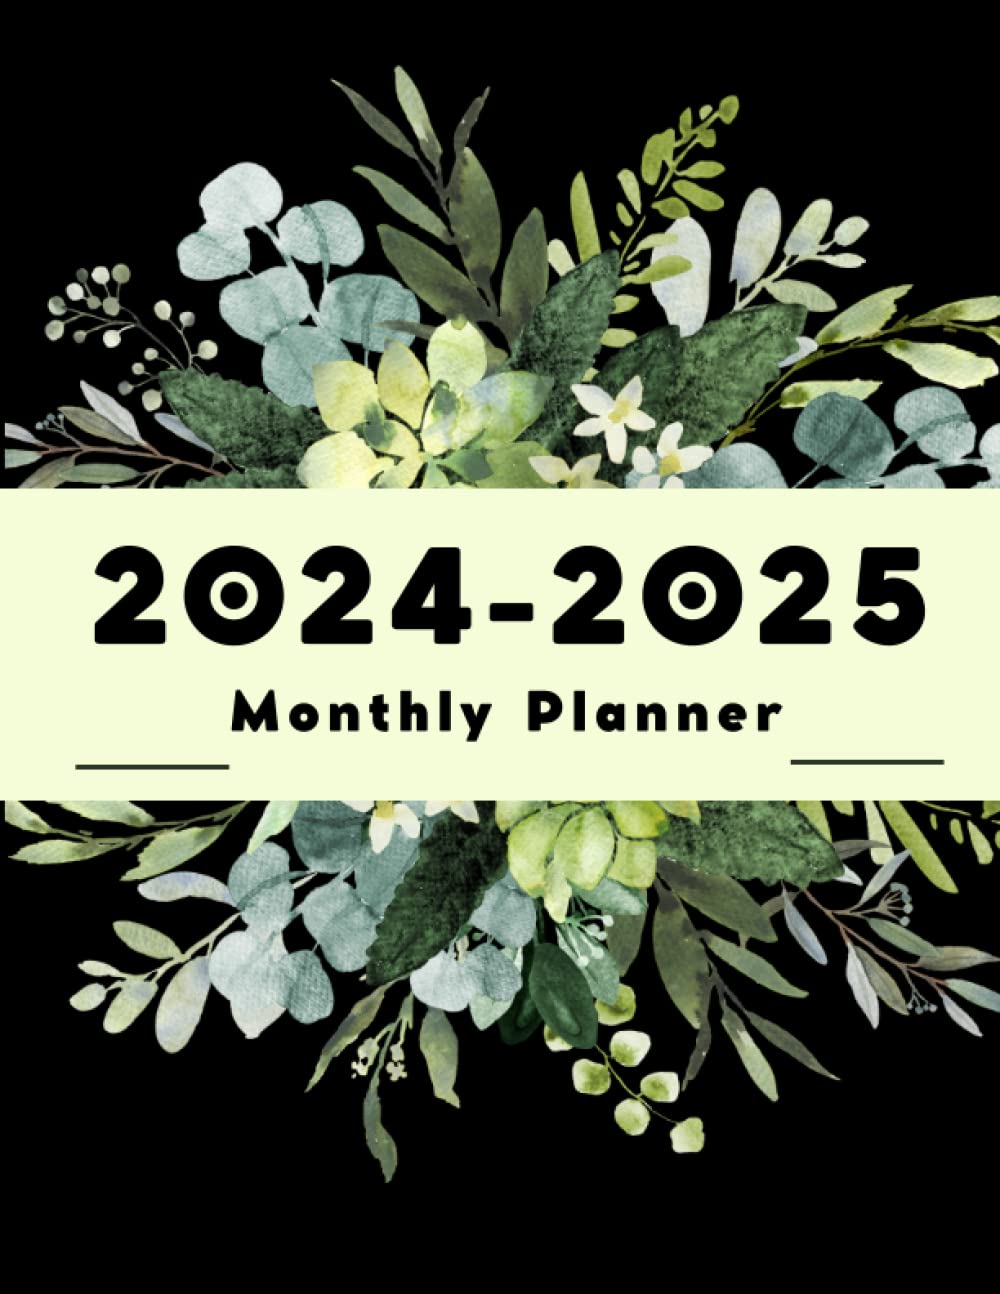 2024-2025 Monthly Planner: 2 Years Calendar from January 2024 to December 2025